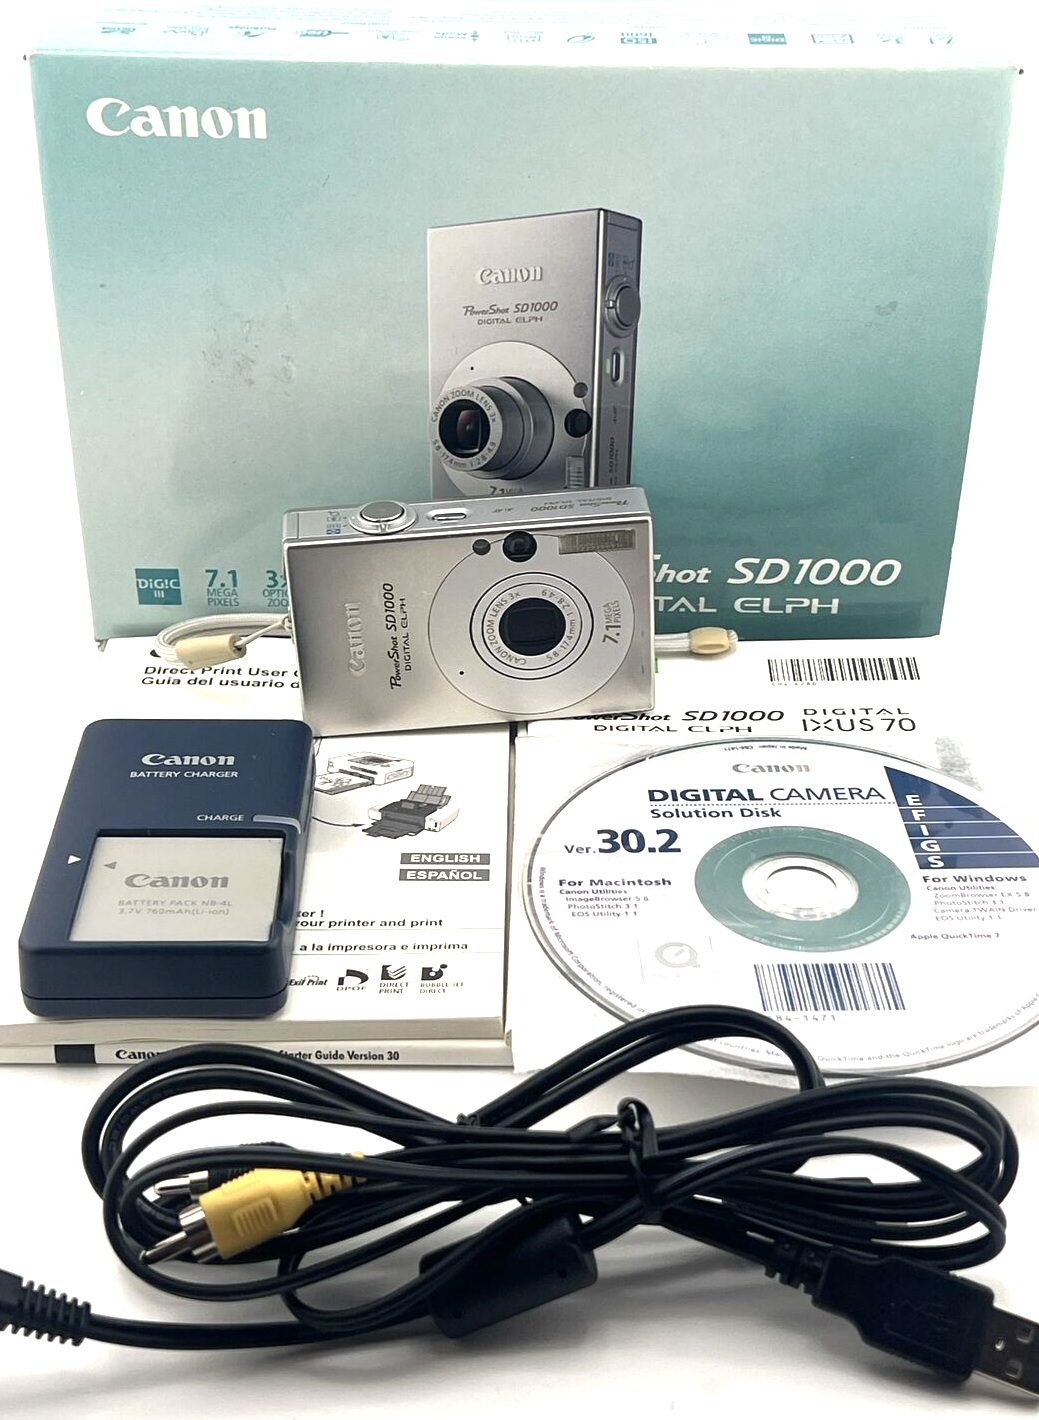 Primary image for Canon PowerShot ELPH SD1000 Digital Camera 7.1MP Bundle Tested IOB